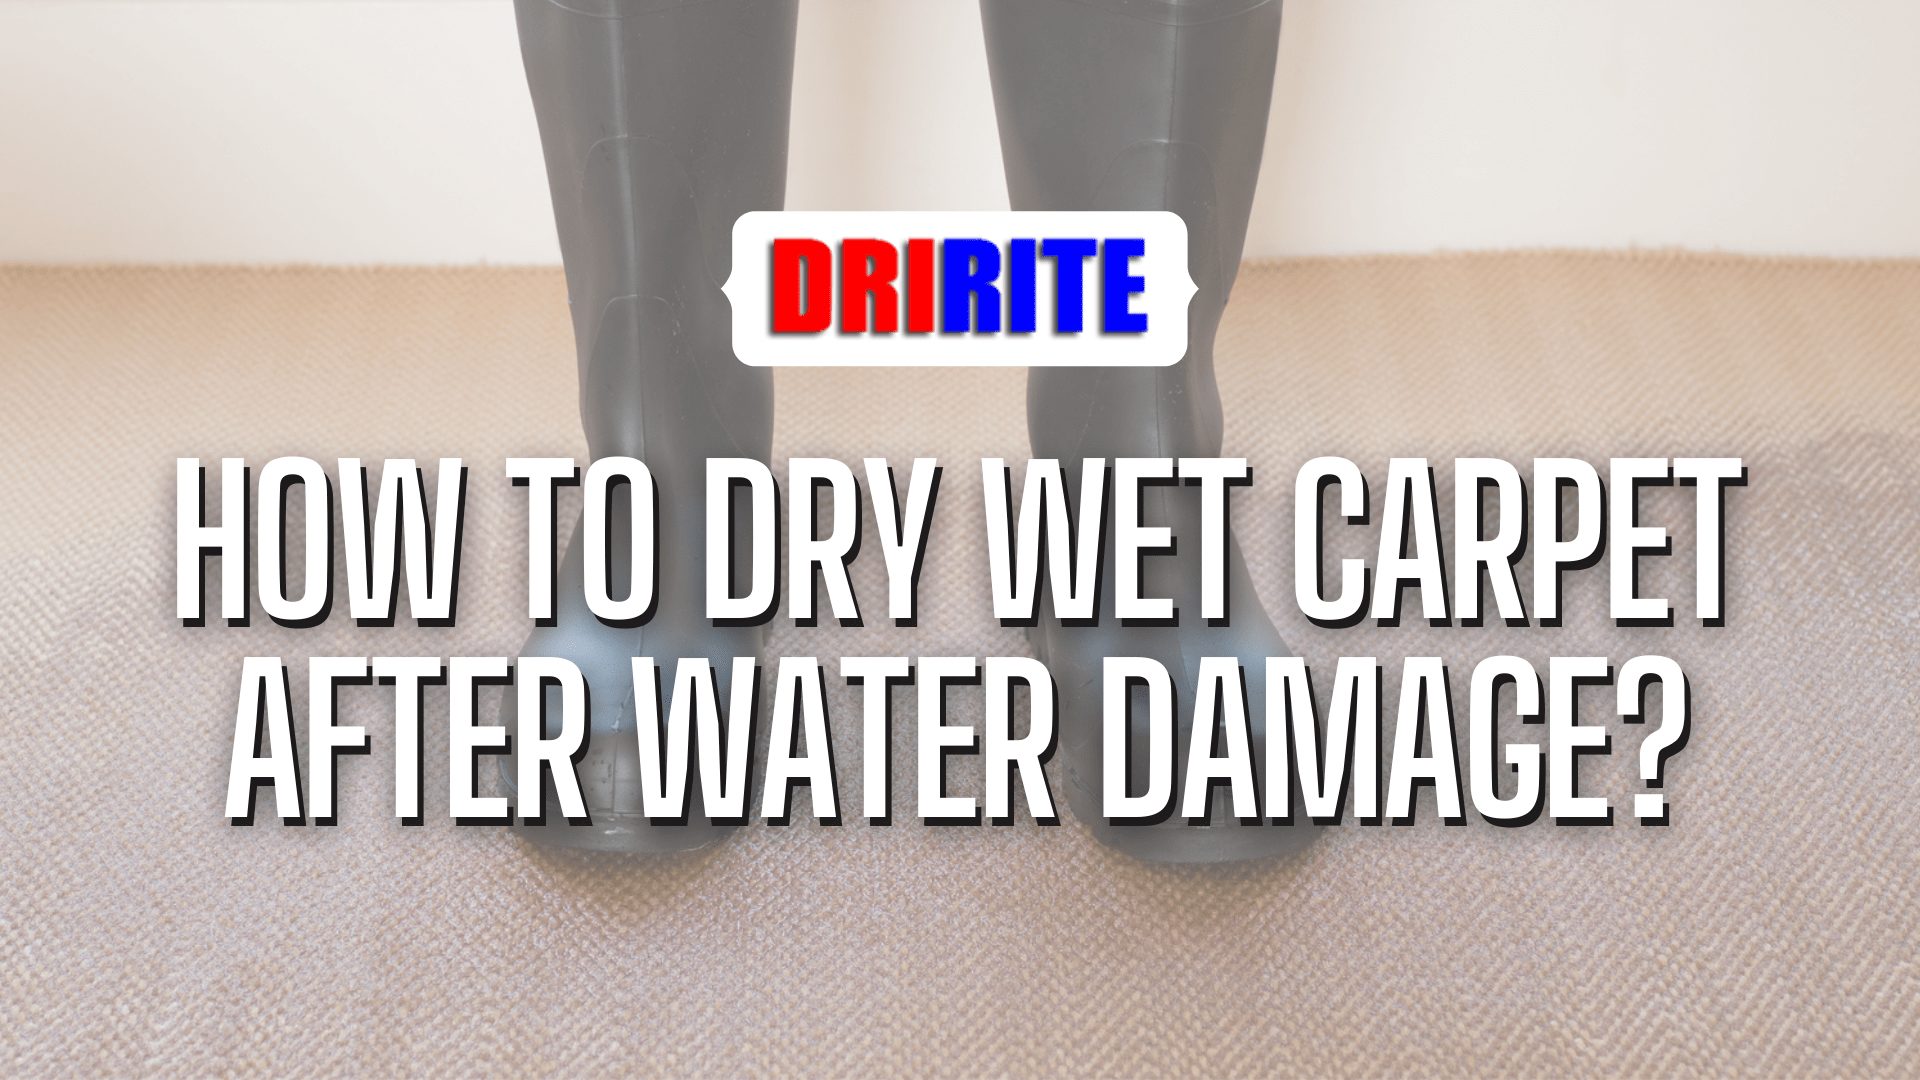 How To Dry Wet Carpet After Water Damage?